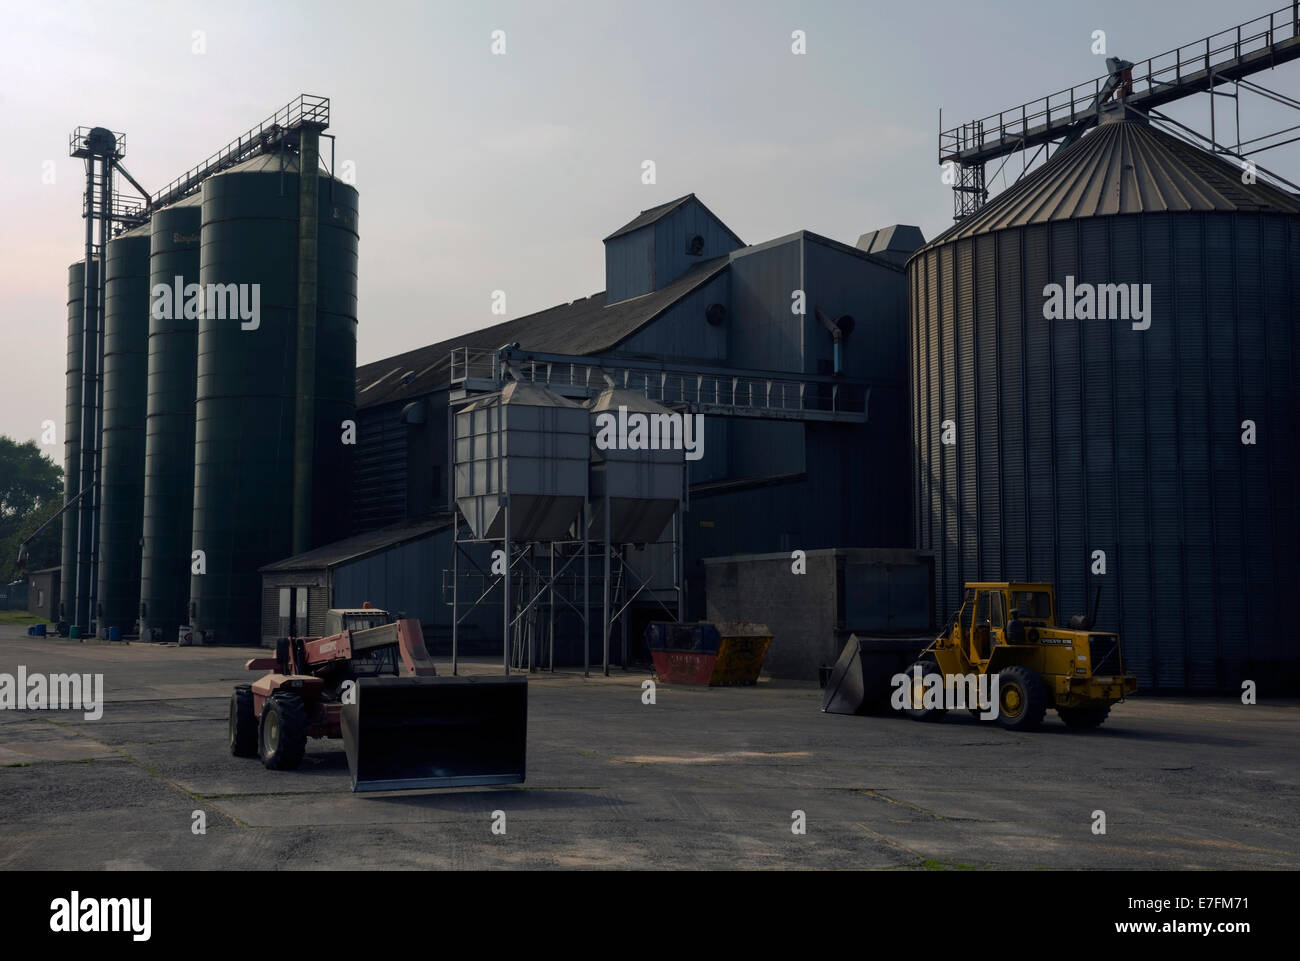 Tractors for moving grain to be processed and stored in giant silos. Stock Photo